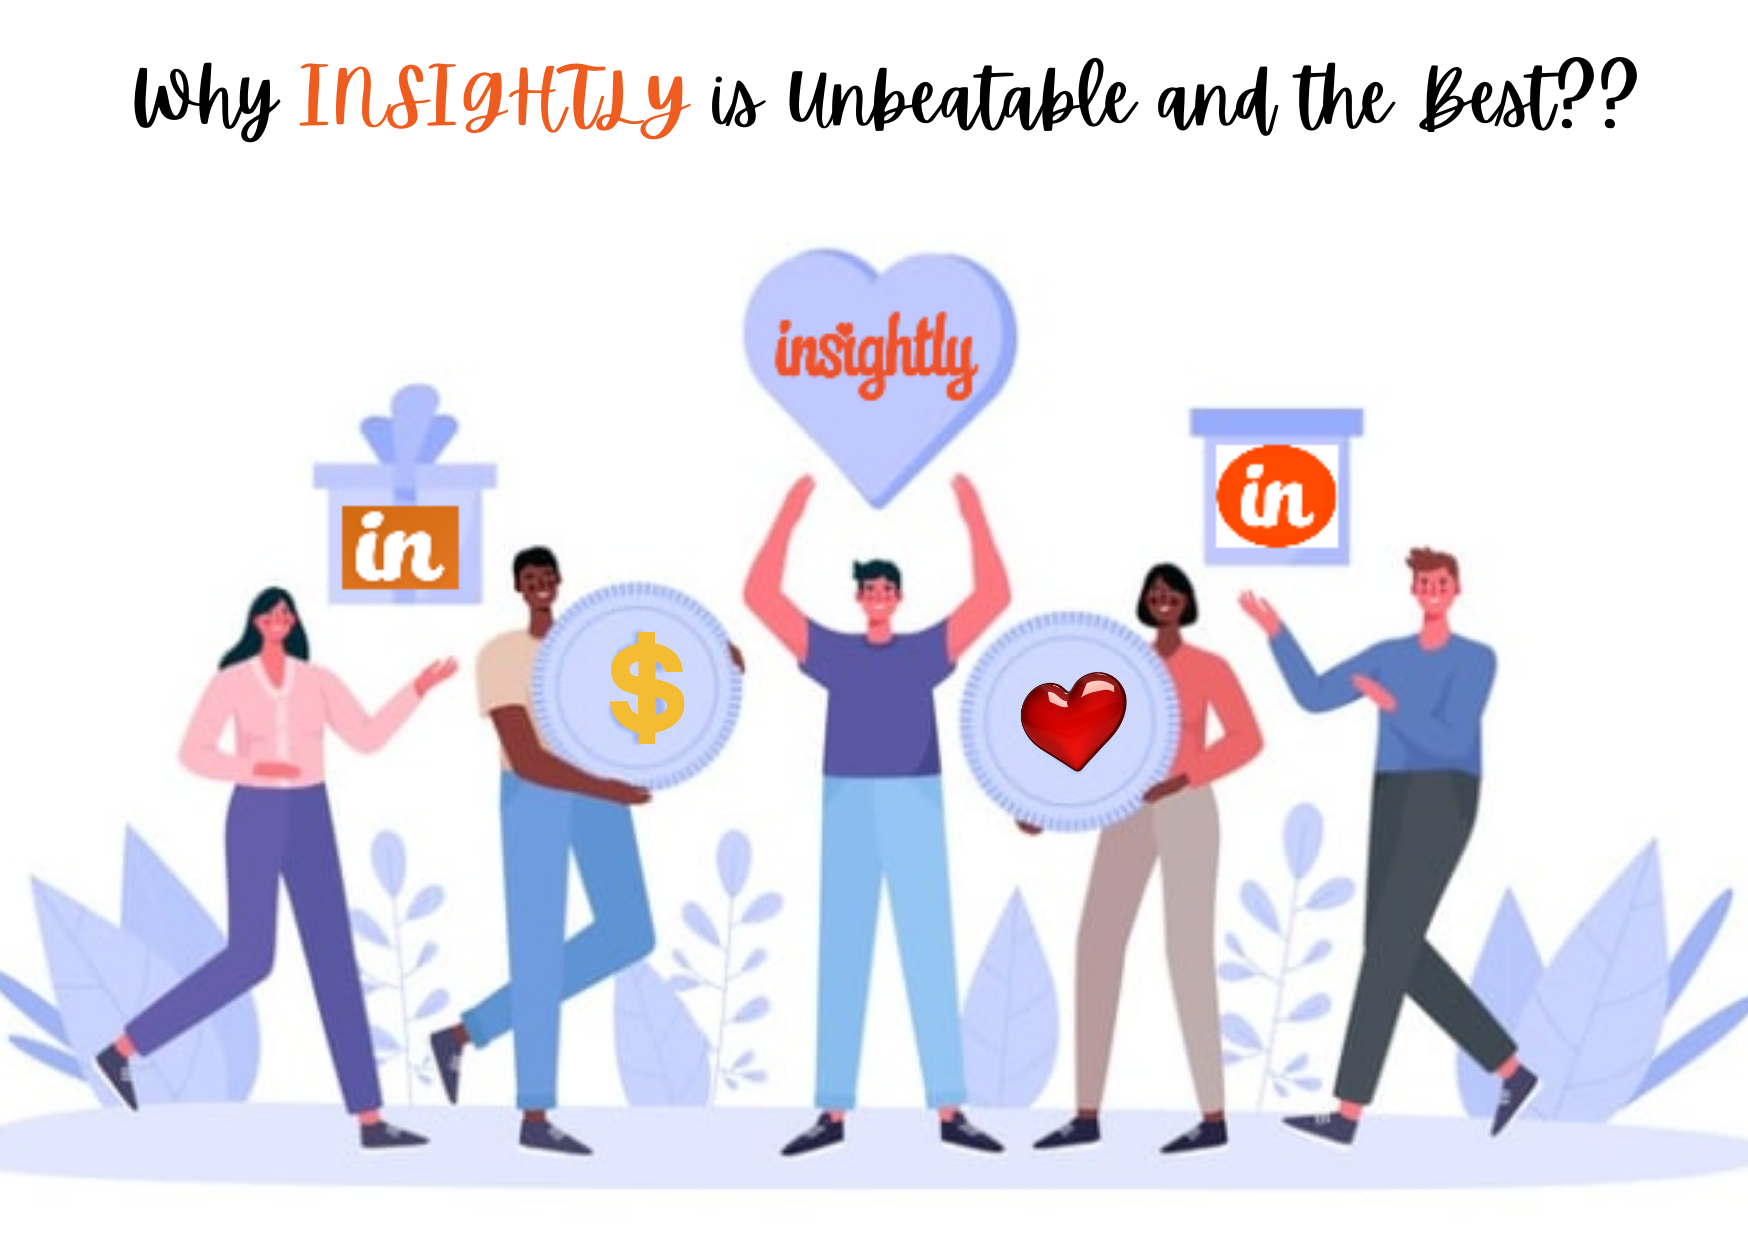 insightly is the best